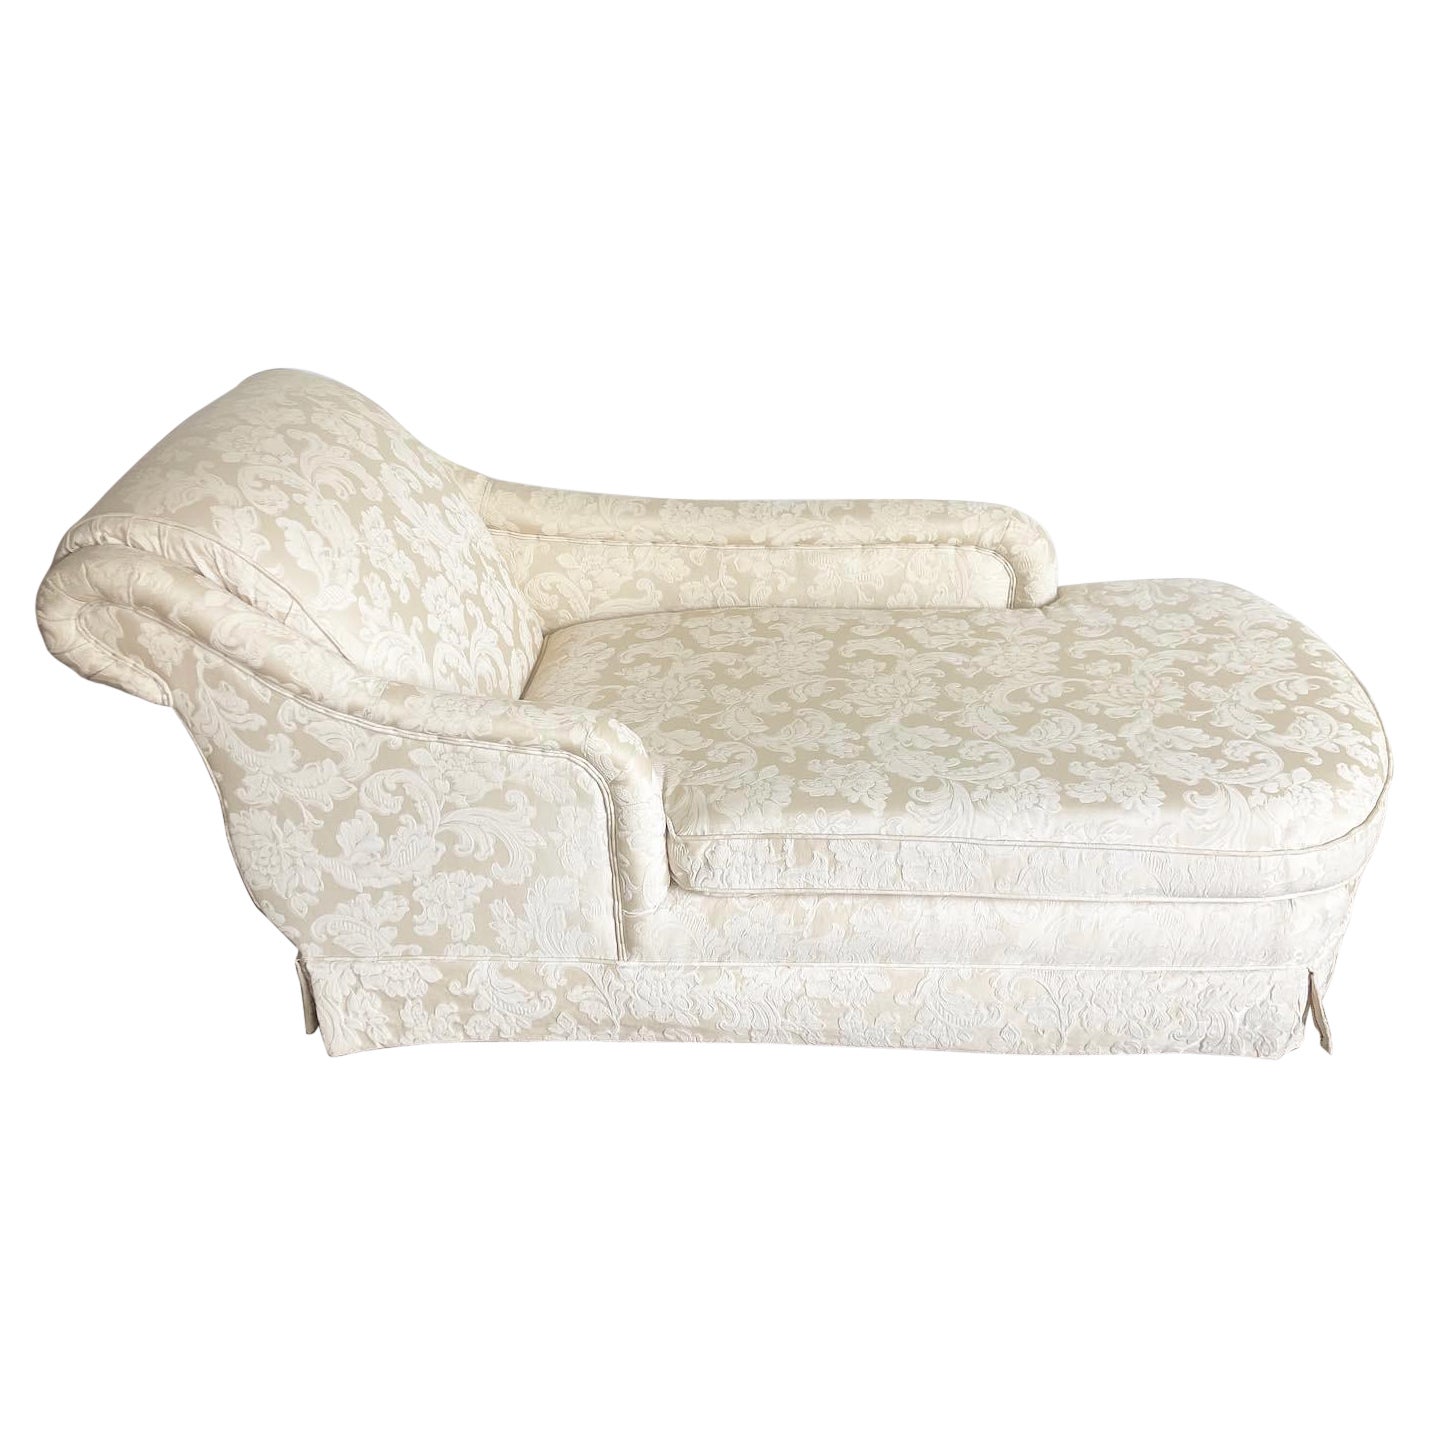 Regency Cream Fabric Chaise Lounge For Sale